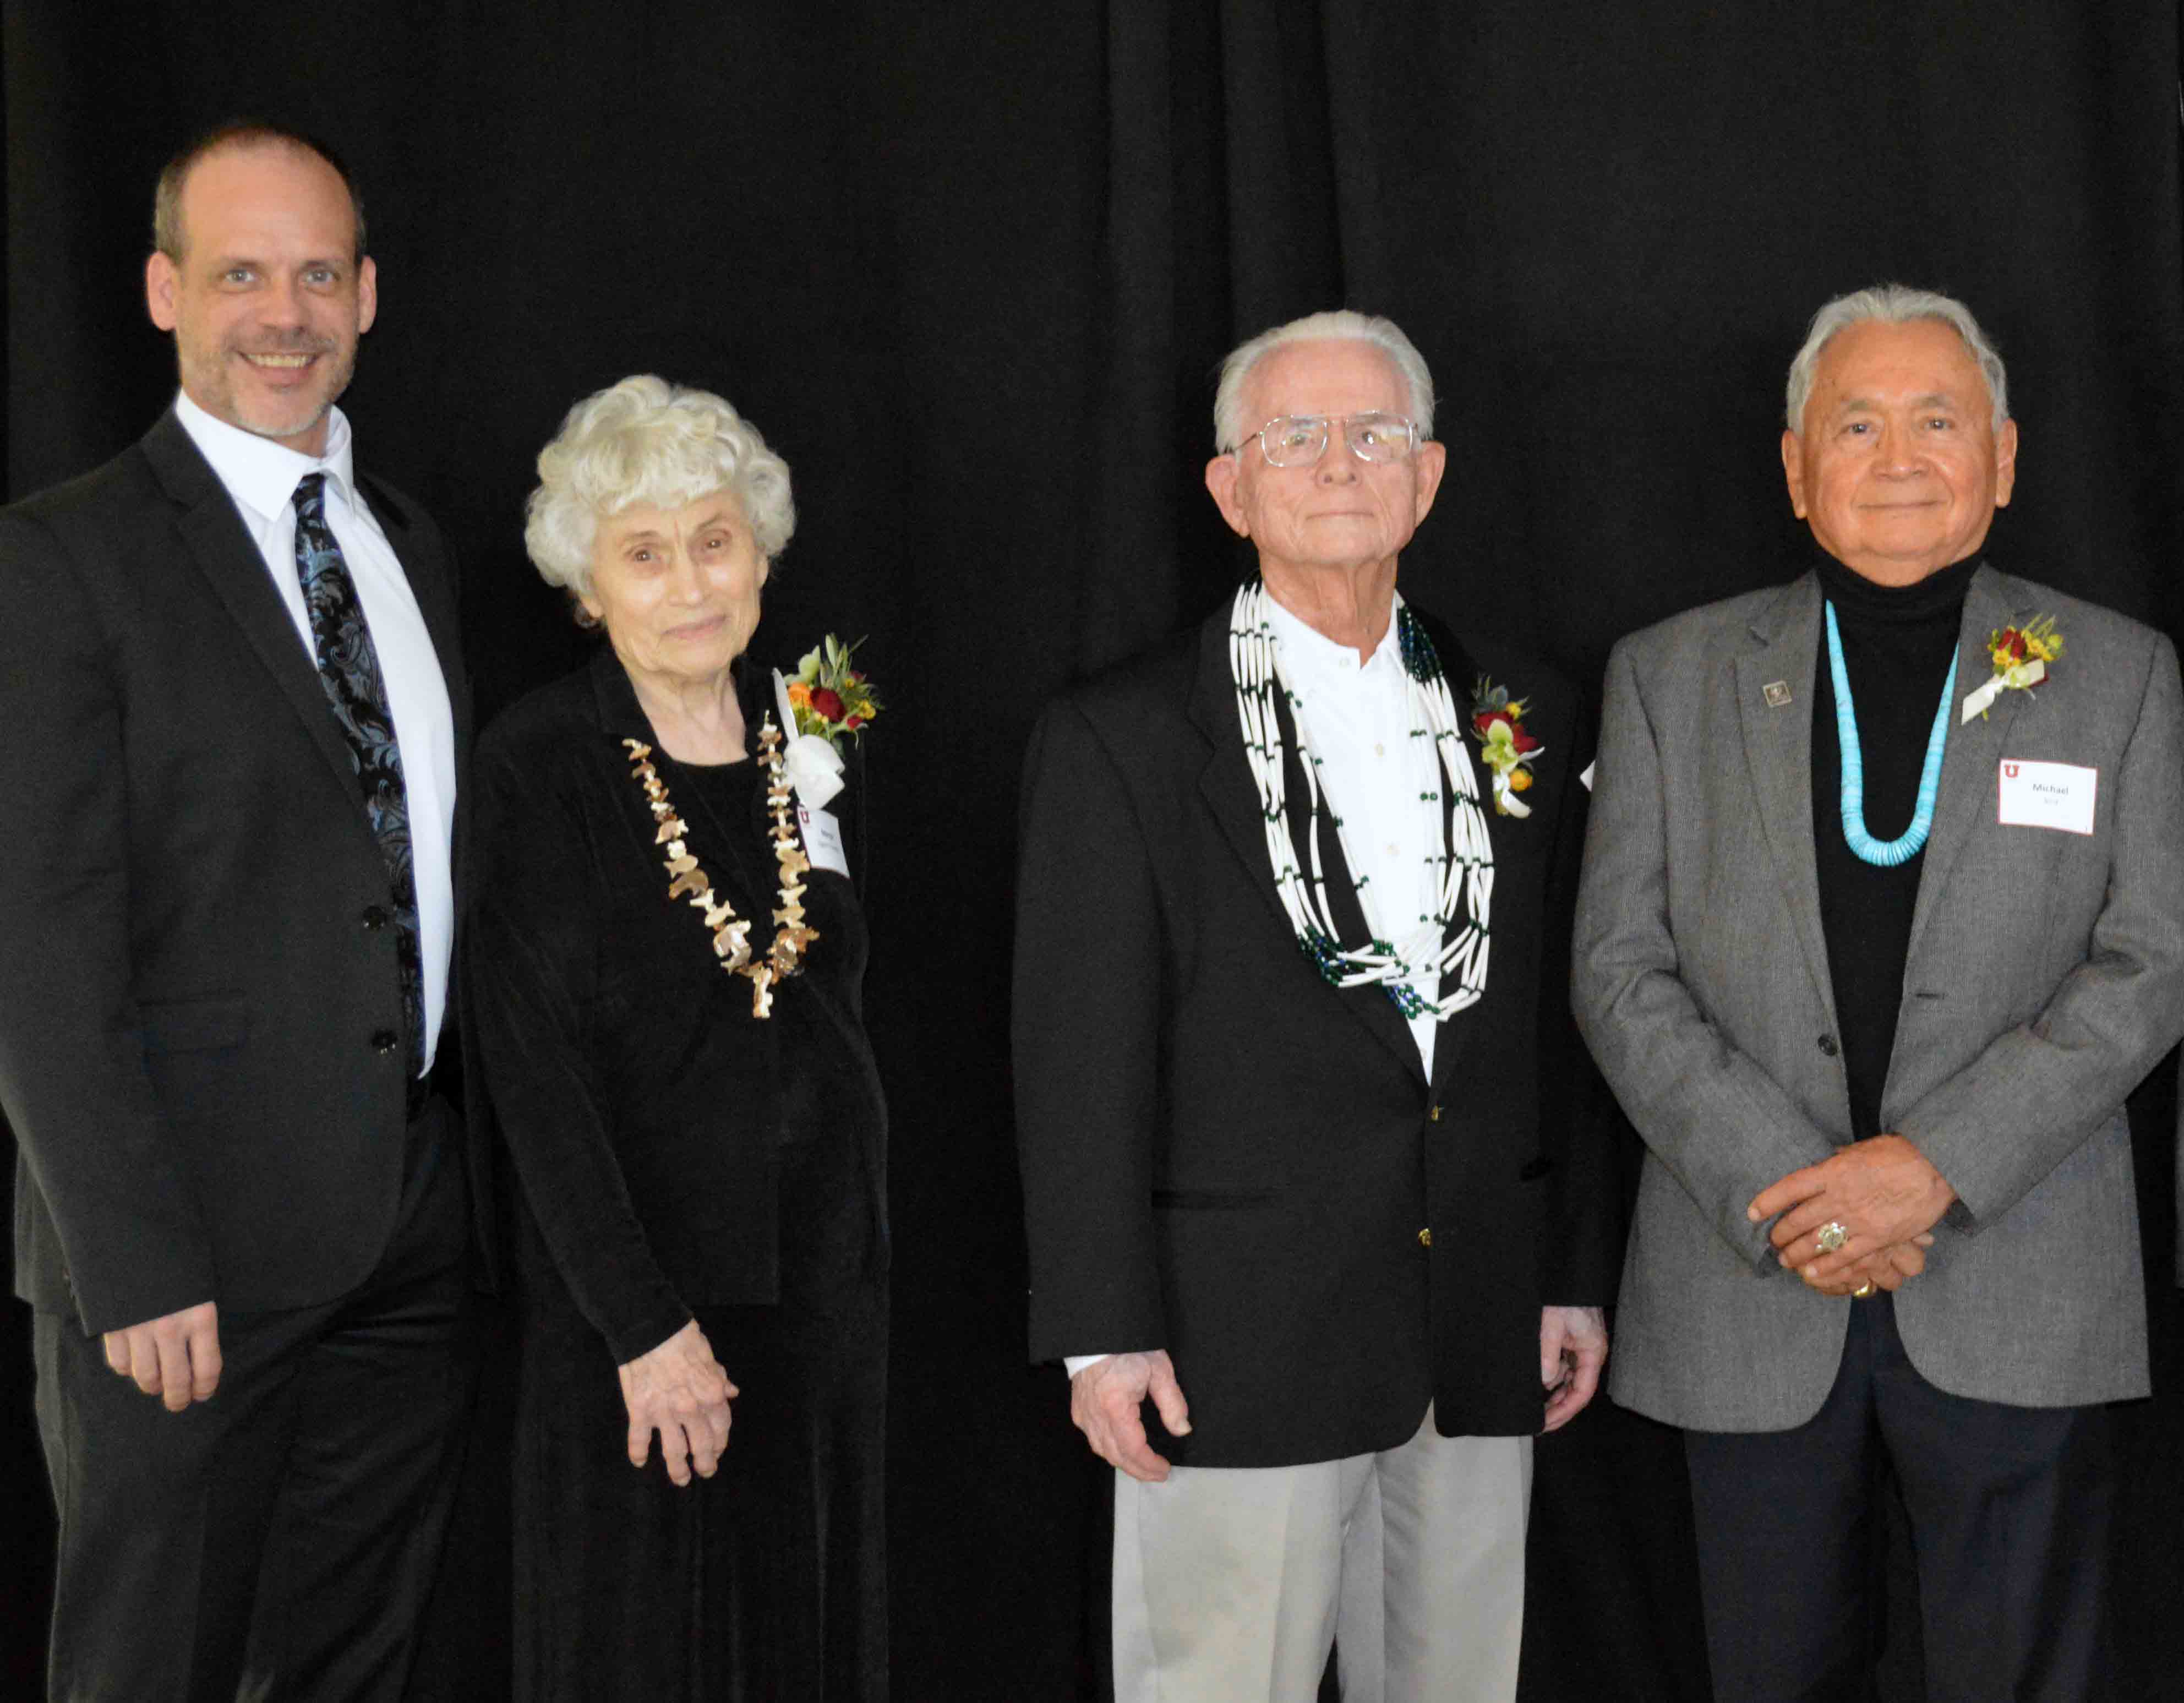 Four middle aged and older adults in semi formal clothing standing in front of a black curtain